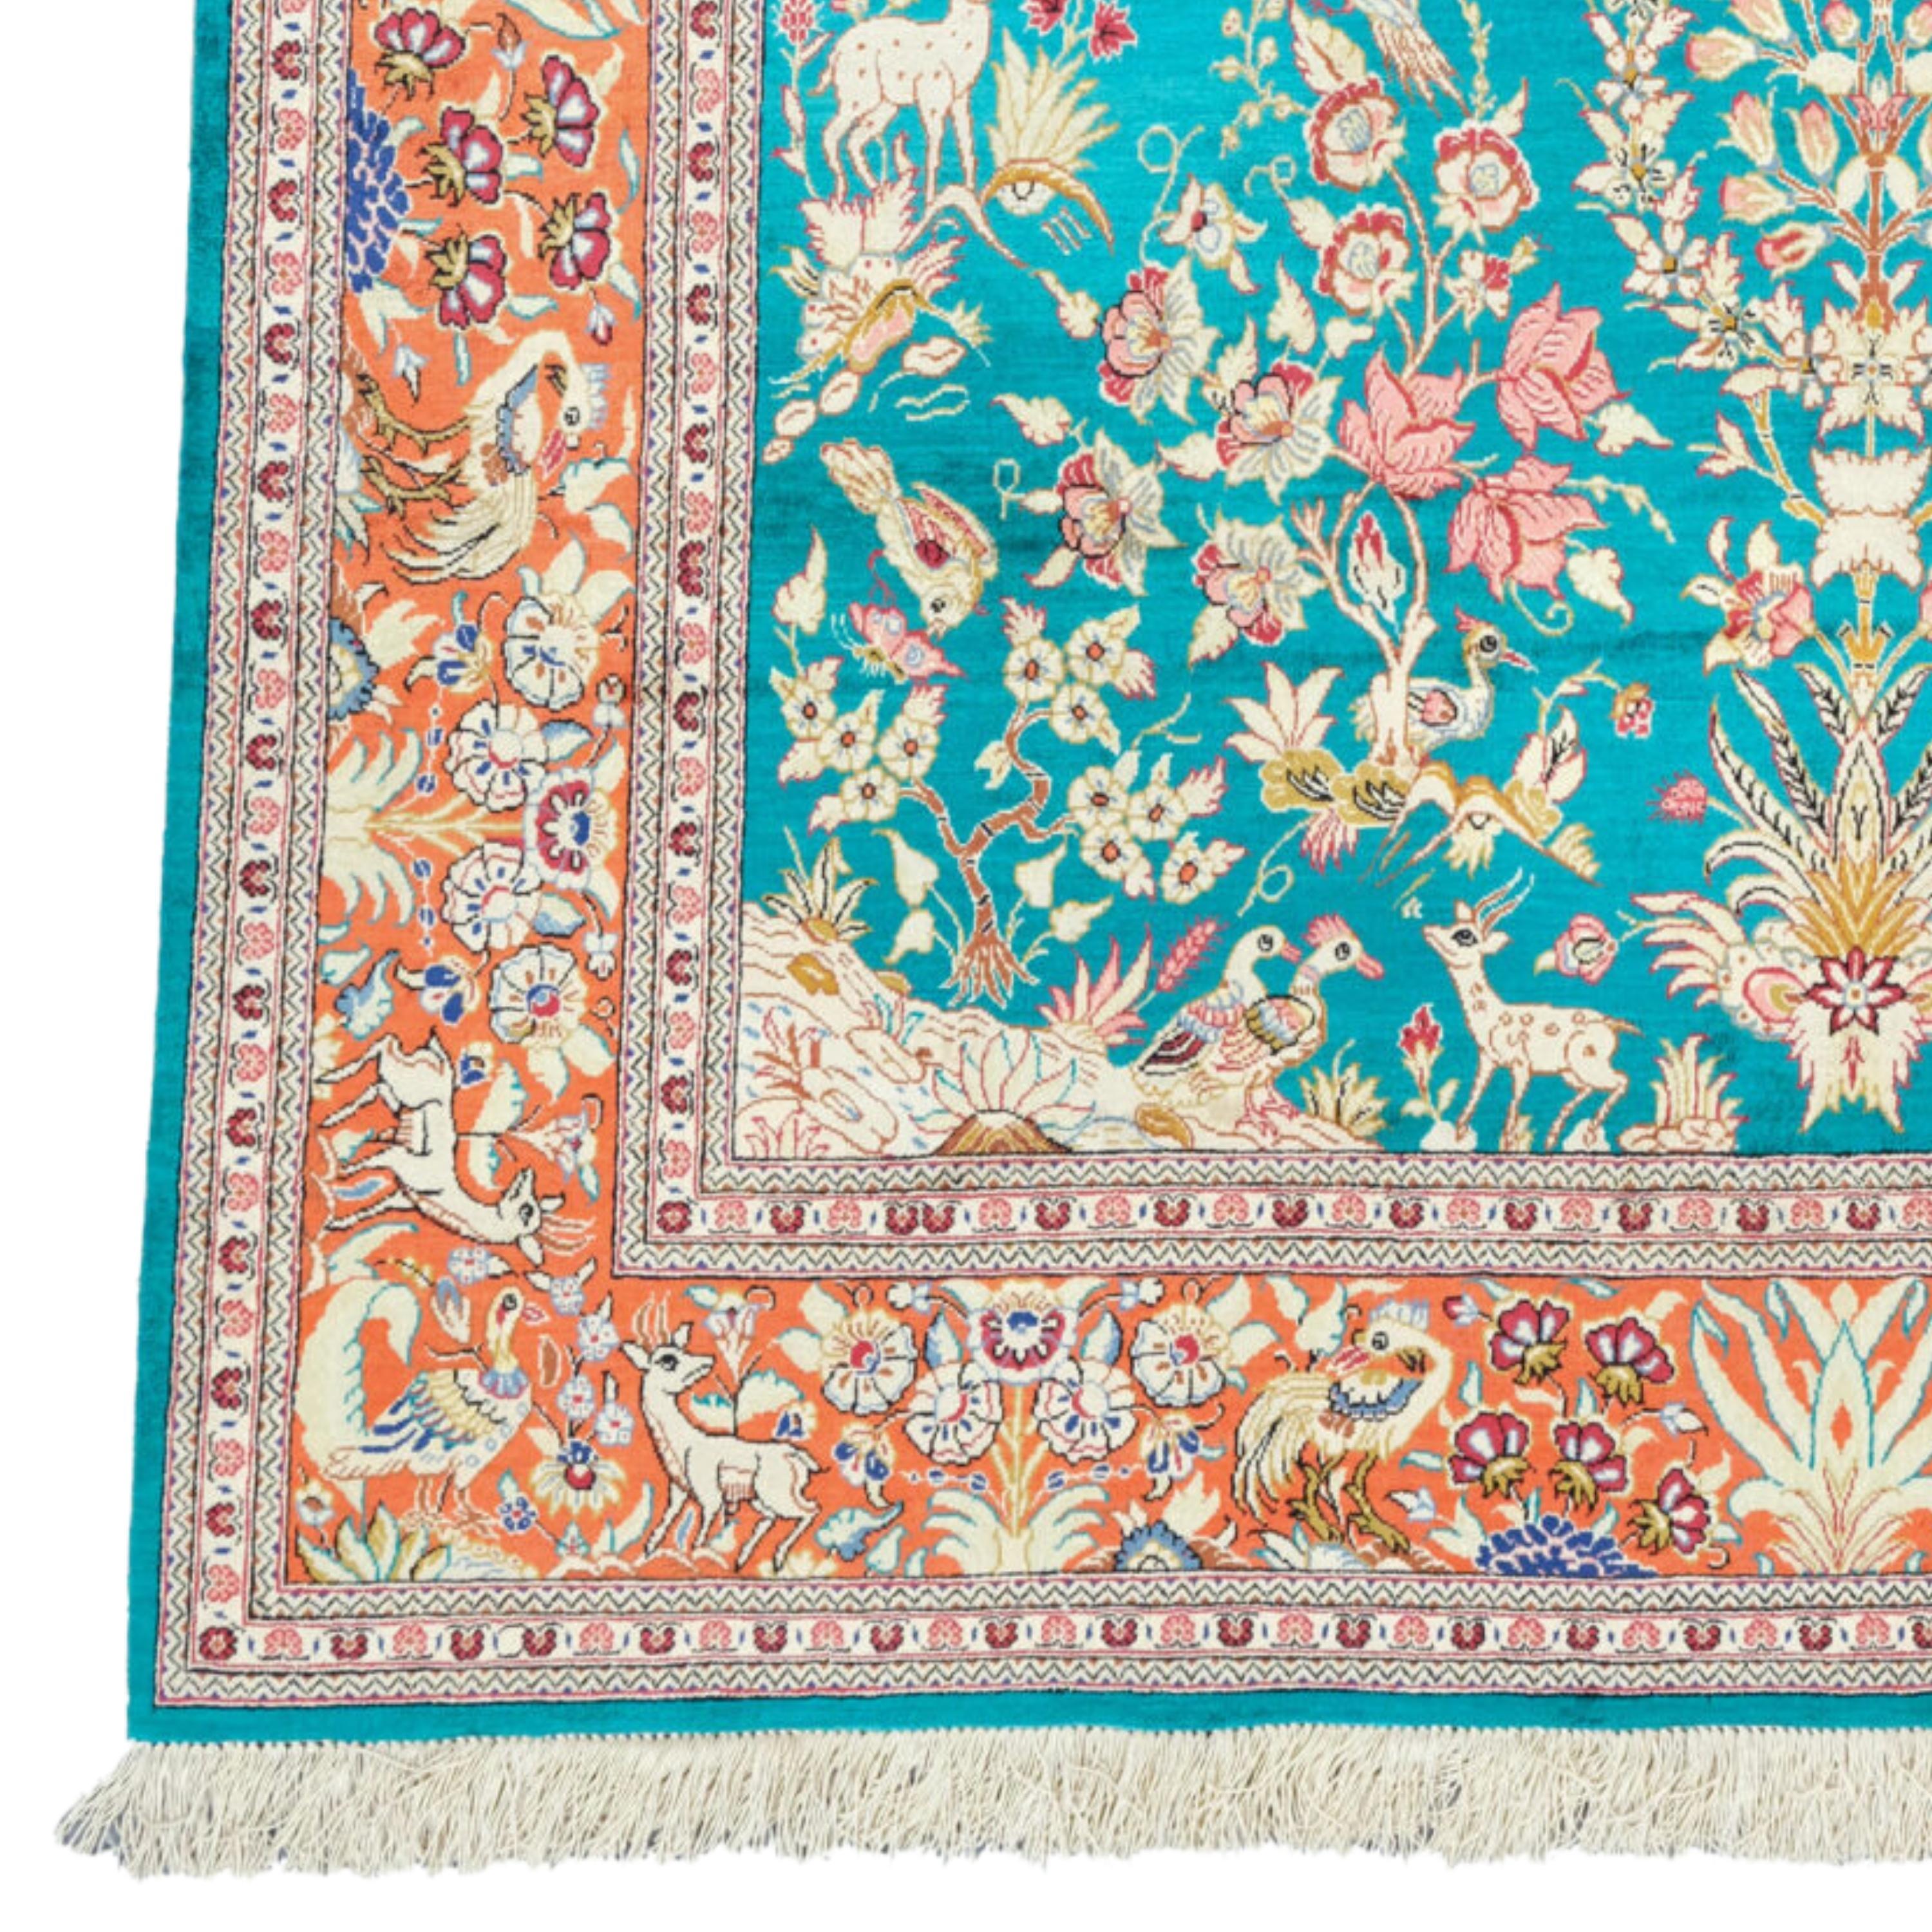 Antique Ghom Rug - Antique Ghom Silk Rug 128x195 cm (50,3x76,7 In)

All carpets made in Qom are produced using only the best raw materials available. Sand silk is considered one of the finest silks in the world, and the wool used is known as cork